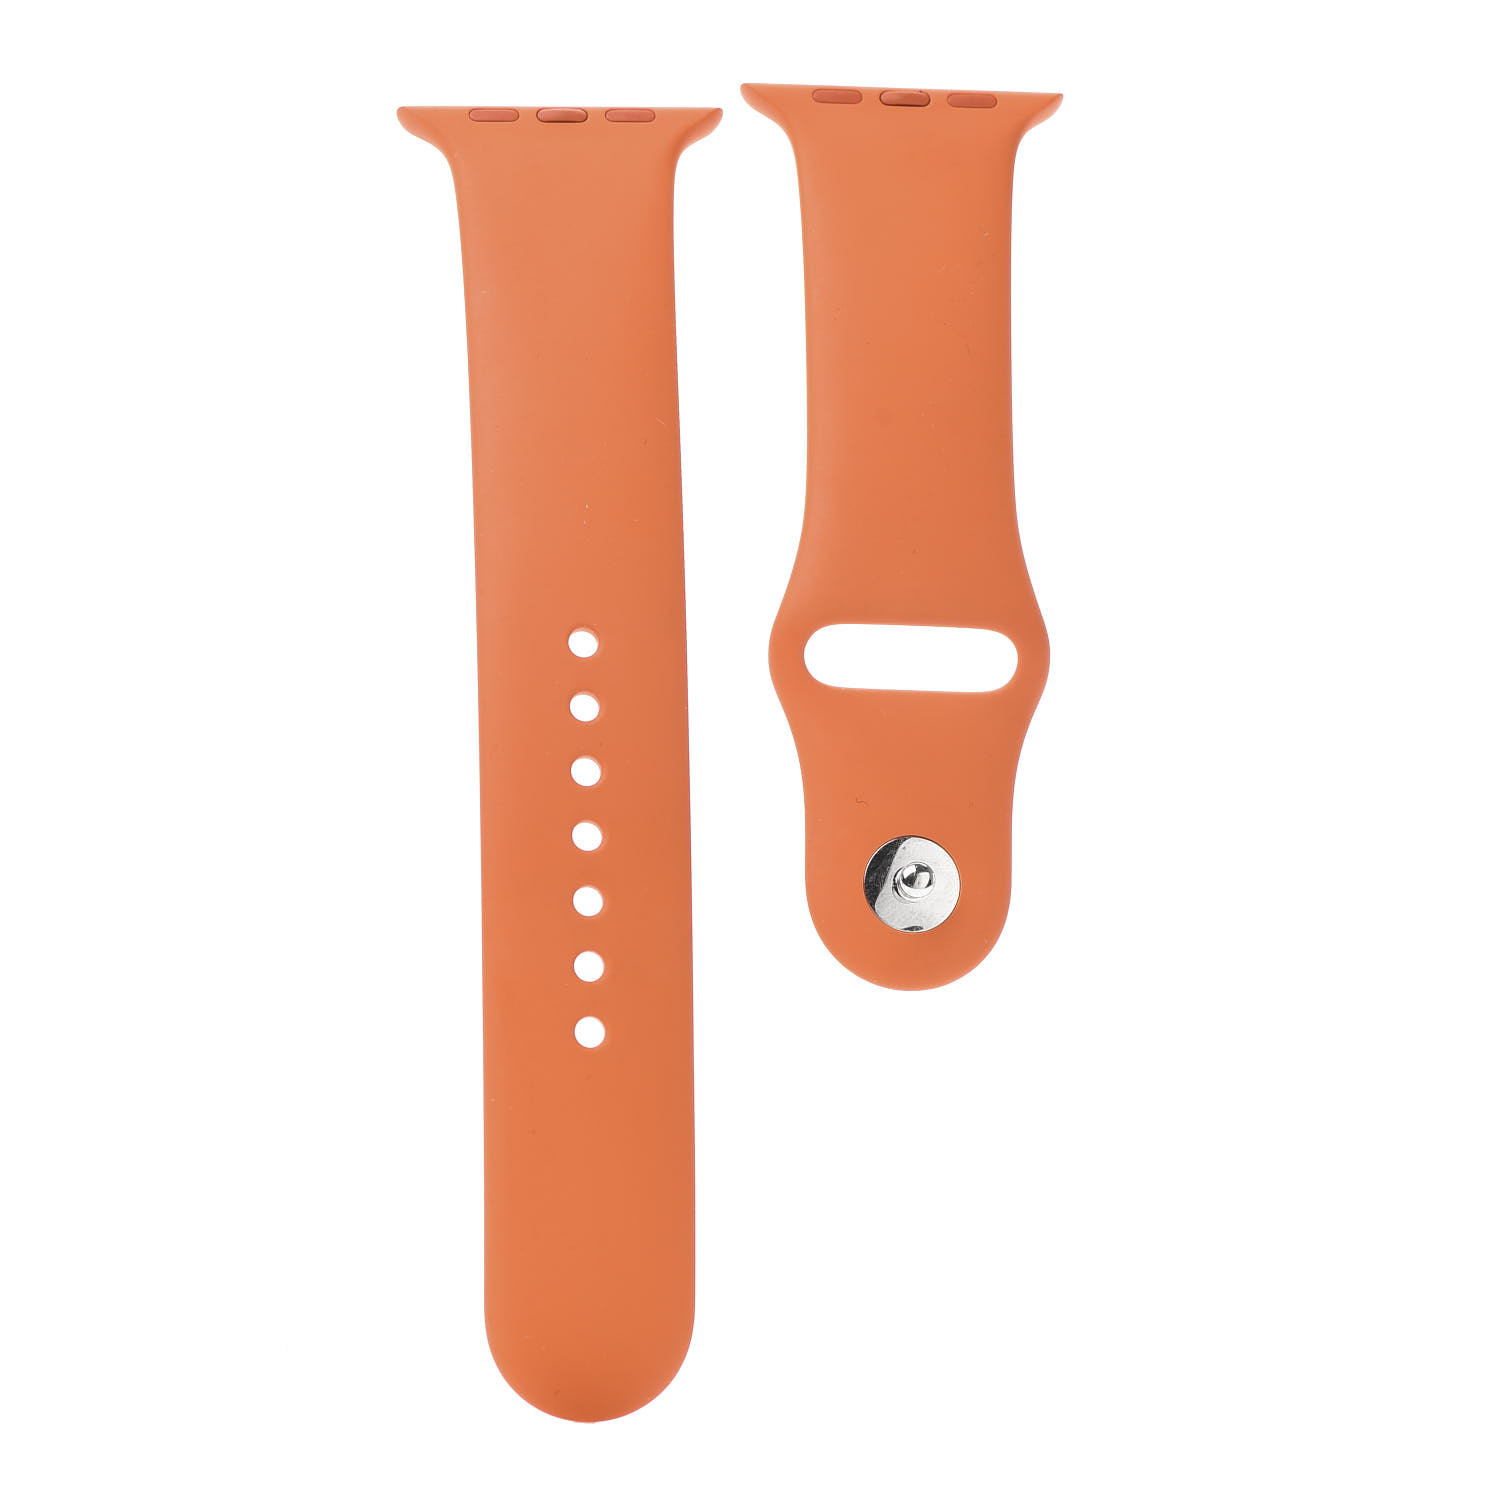 42mm hermes apple watch band